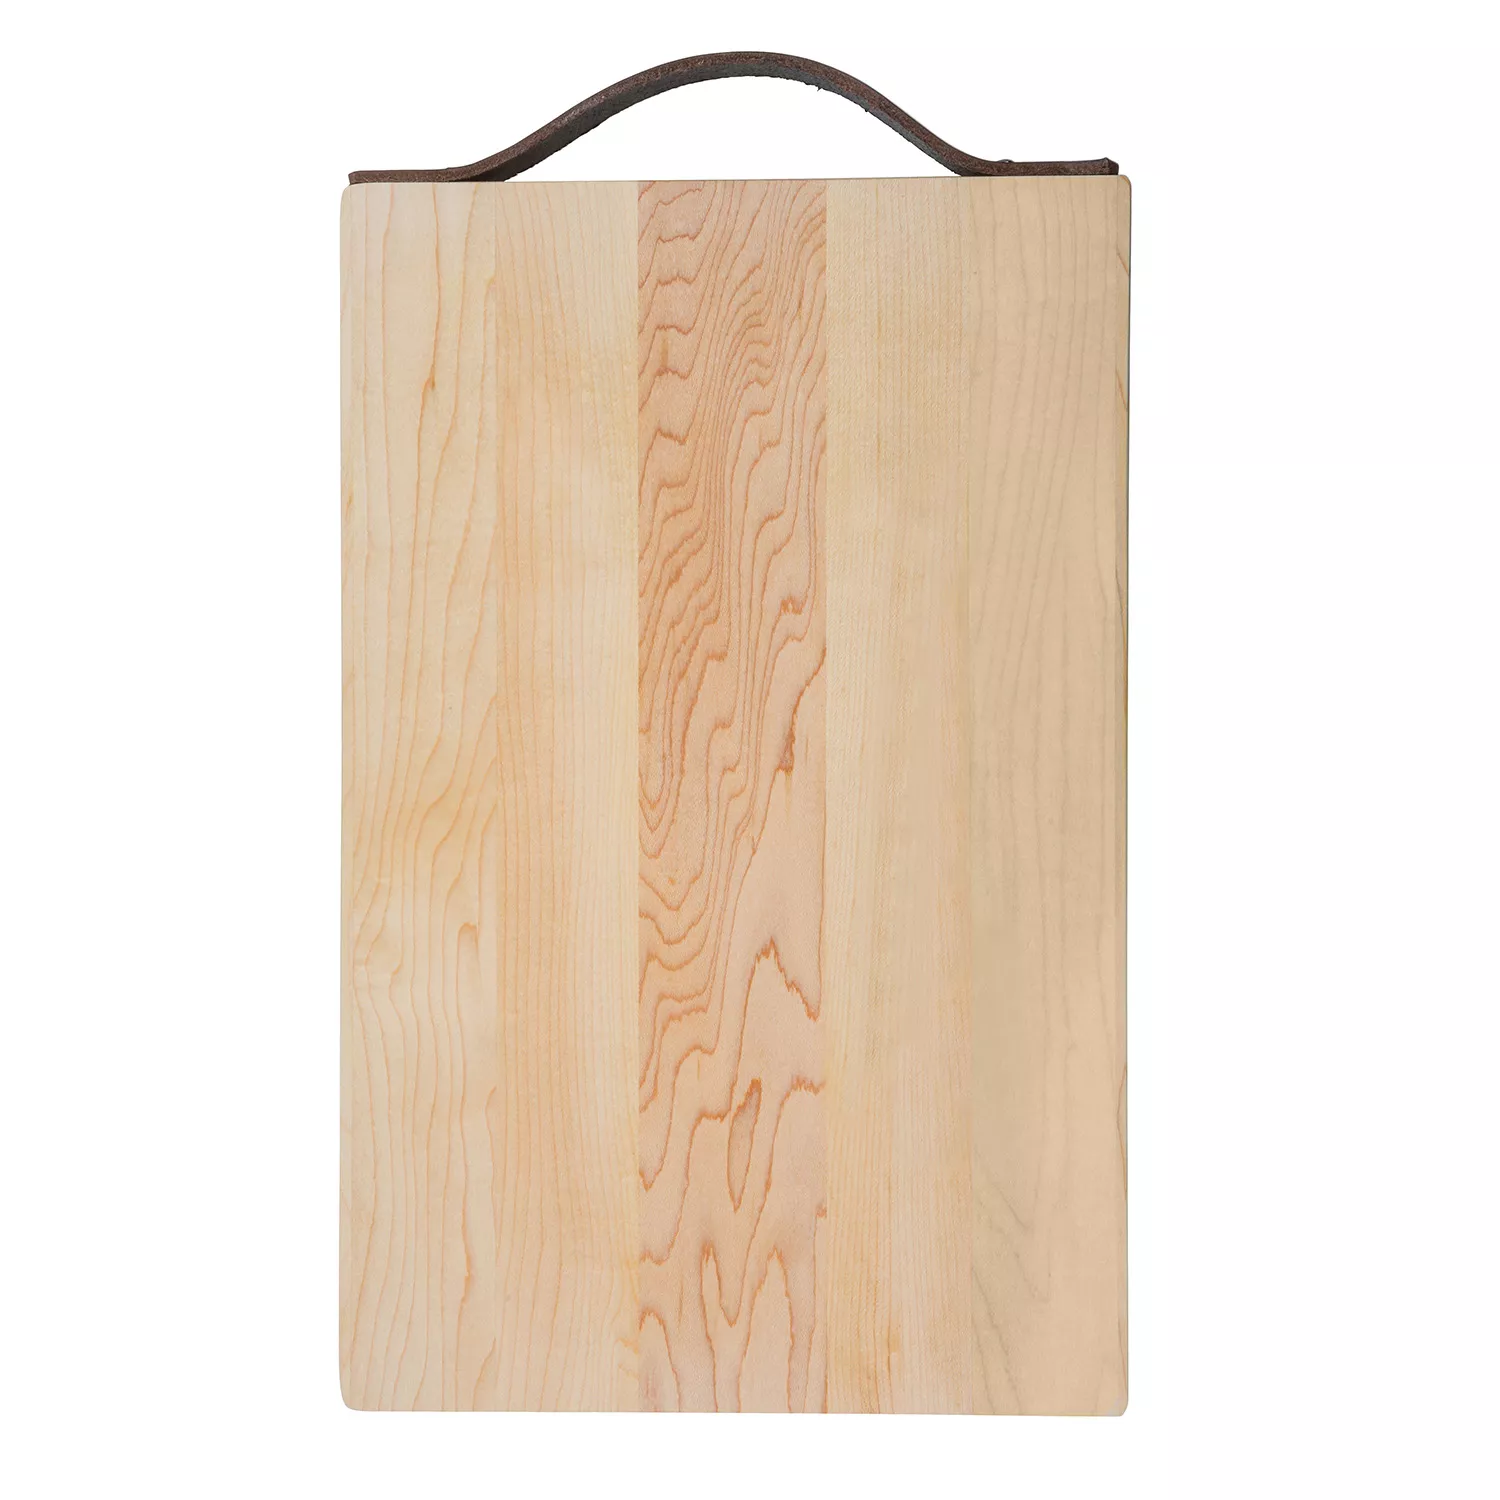 J.K. Adams Maple serving Board with Leather Handle, 14" X 9"